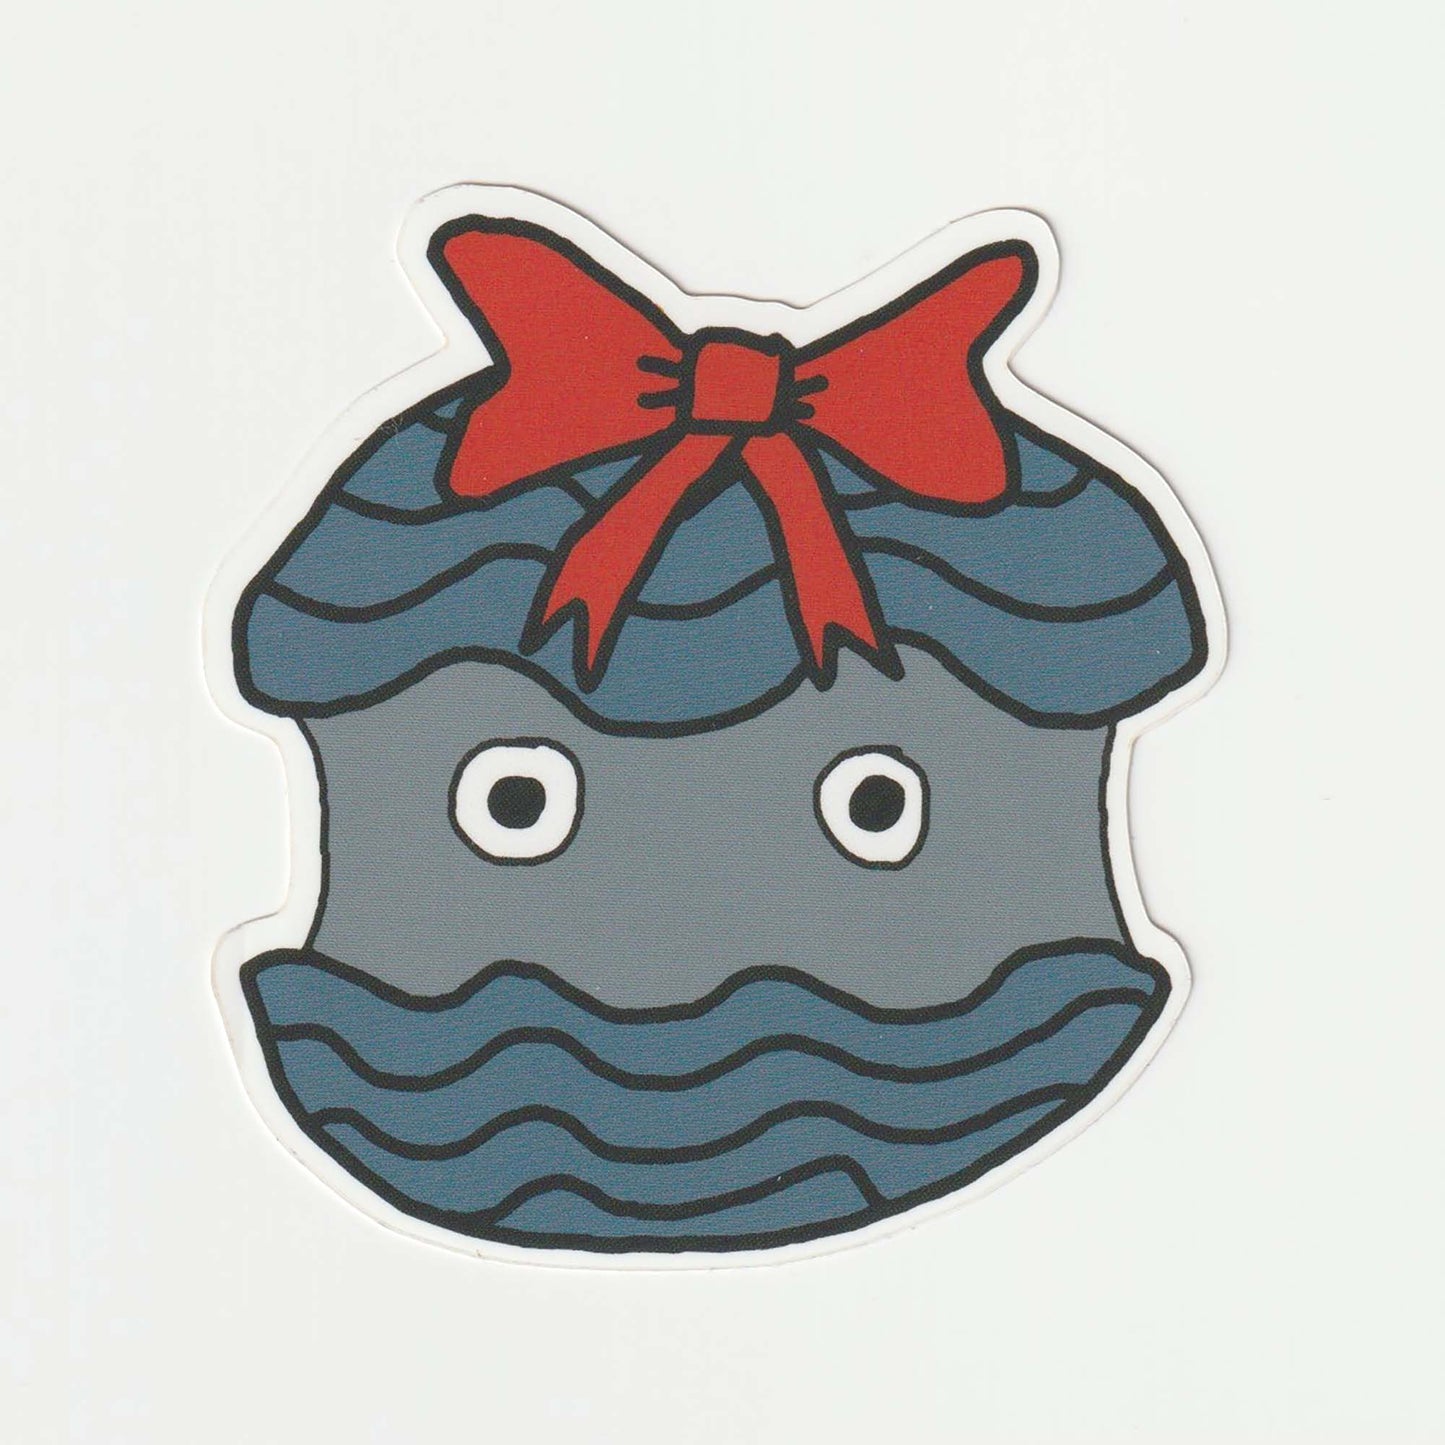 Clam with Bow (Vinyl Sticker)